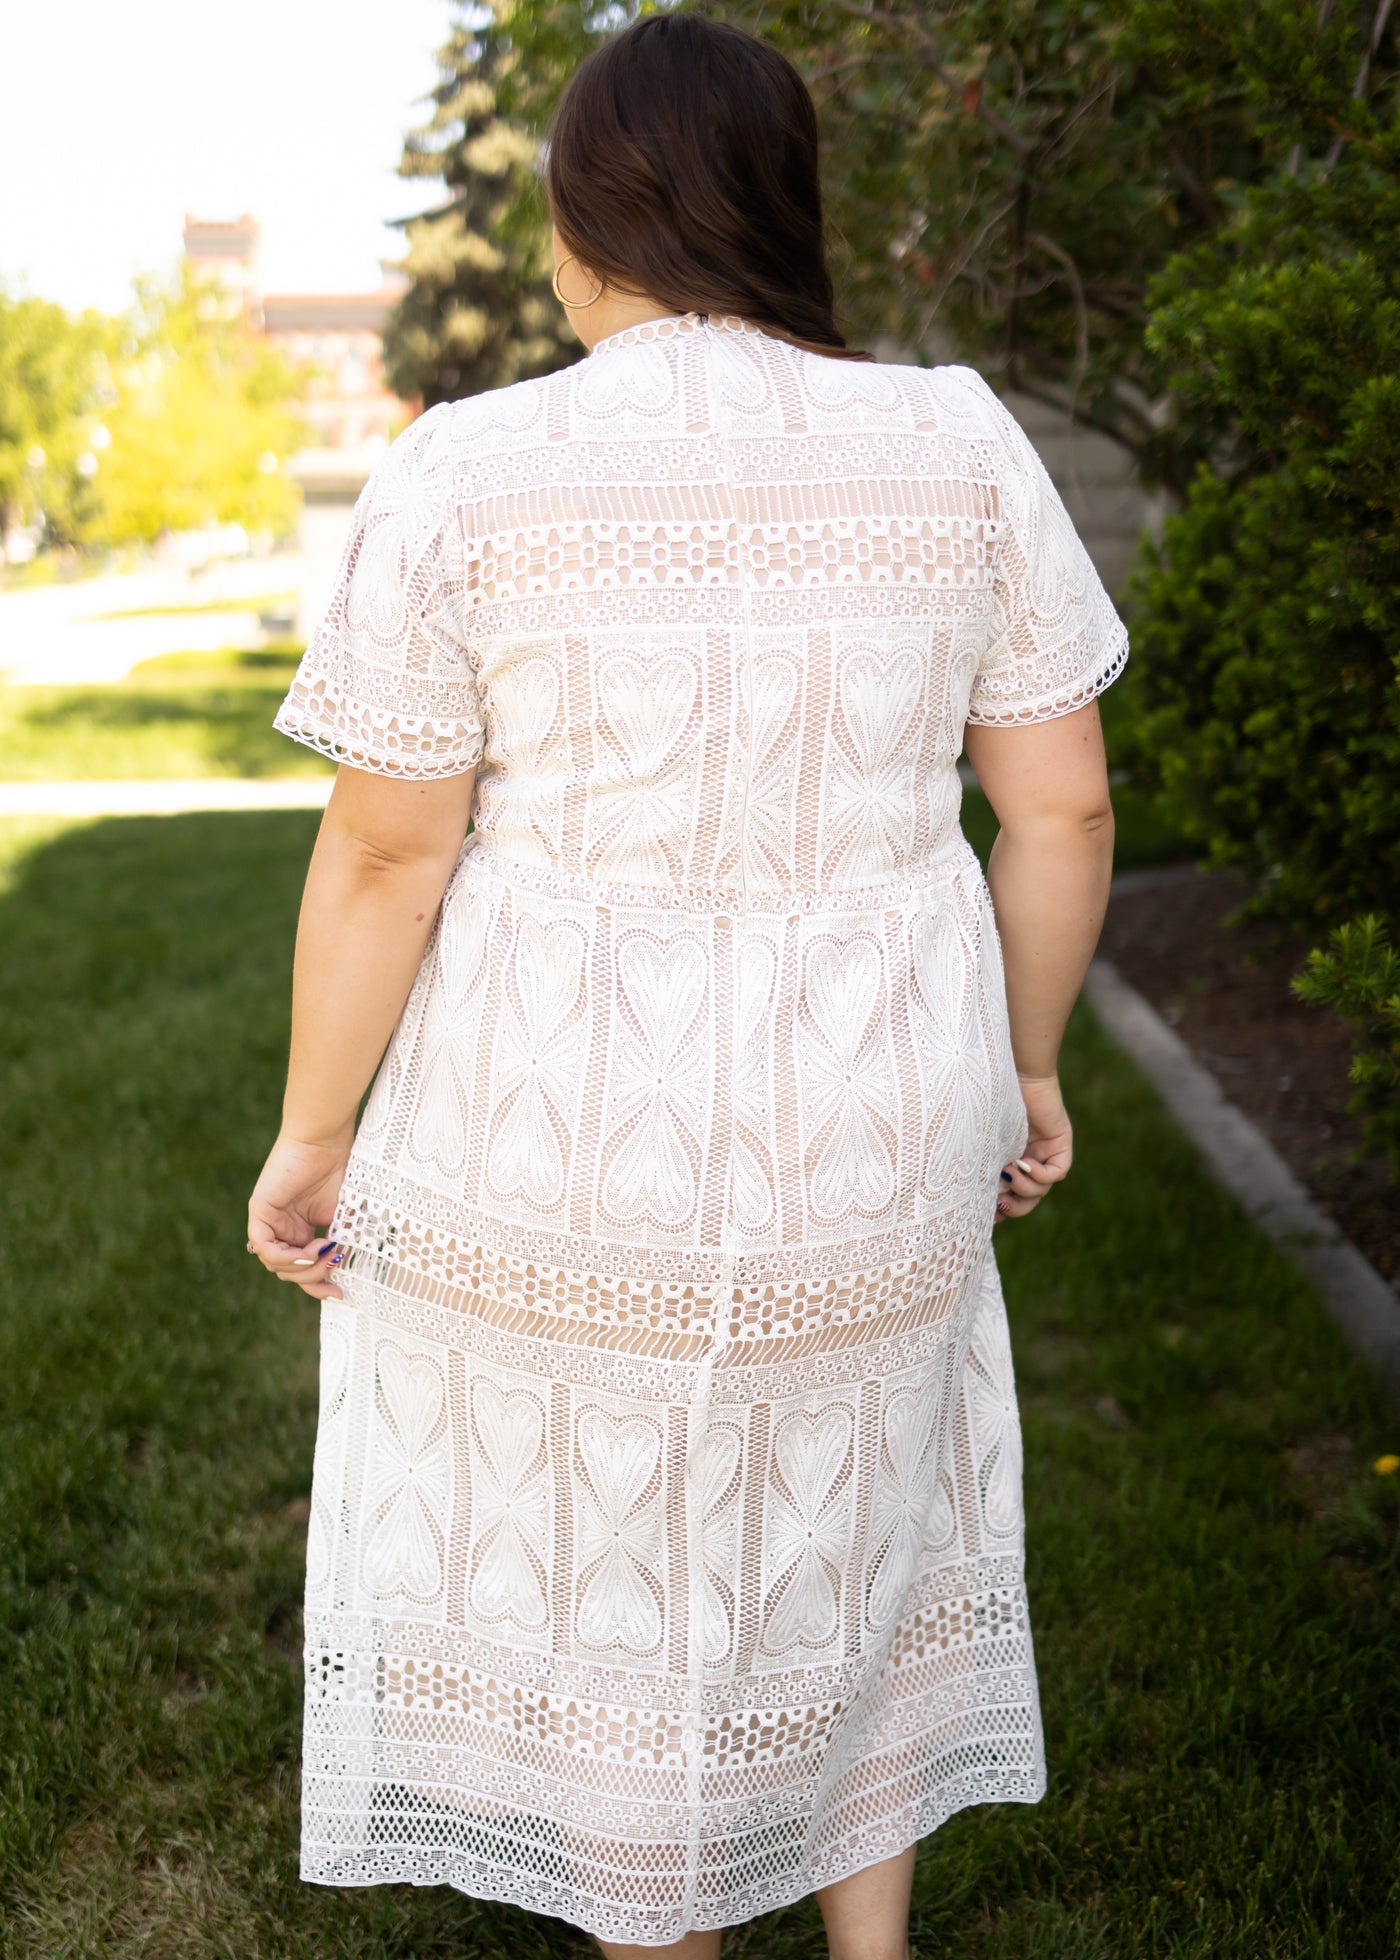 Plus size white lace dress that zips up the back